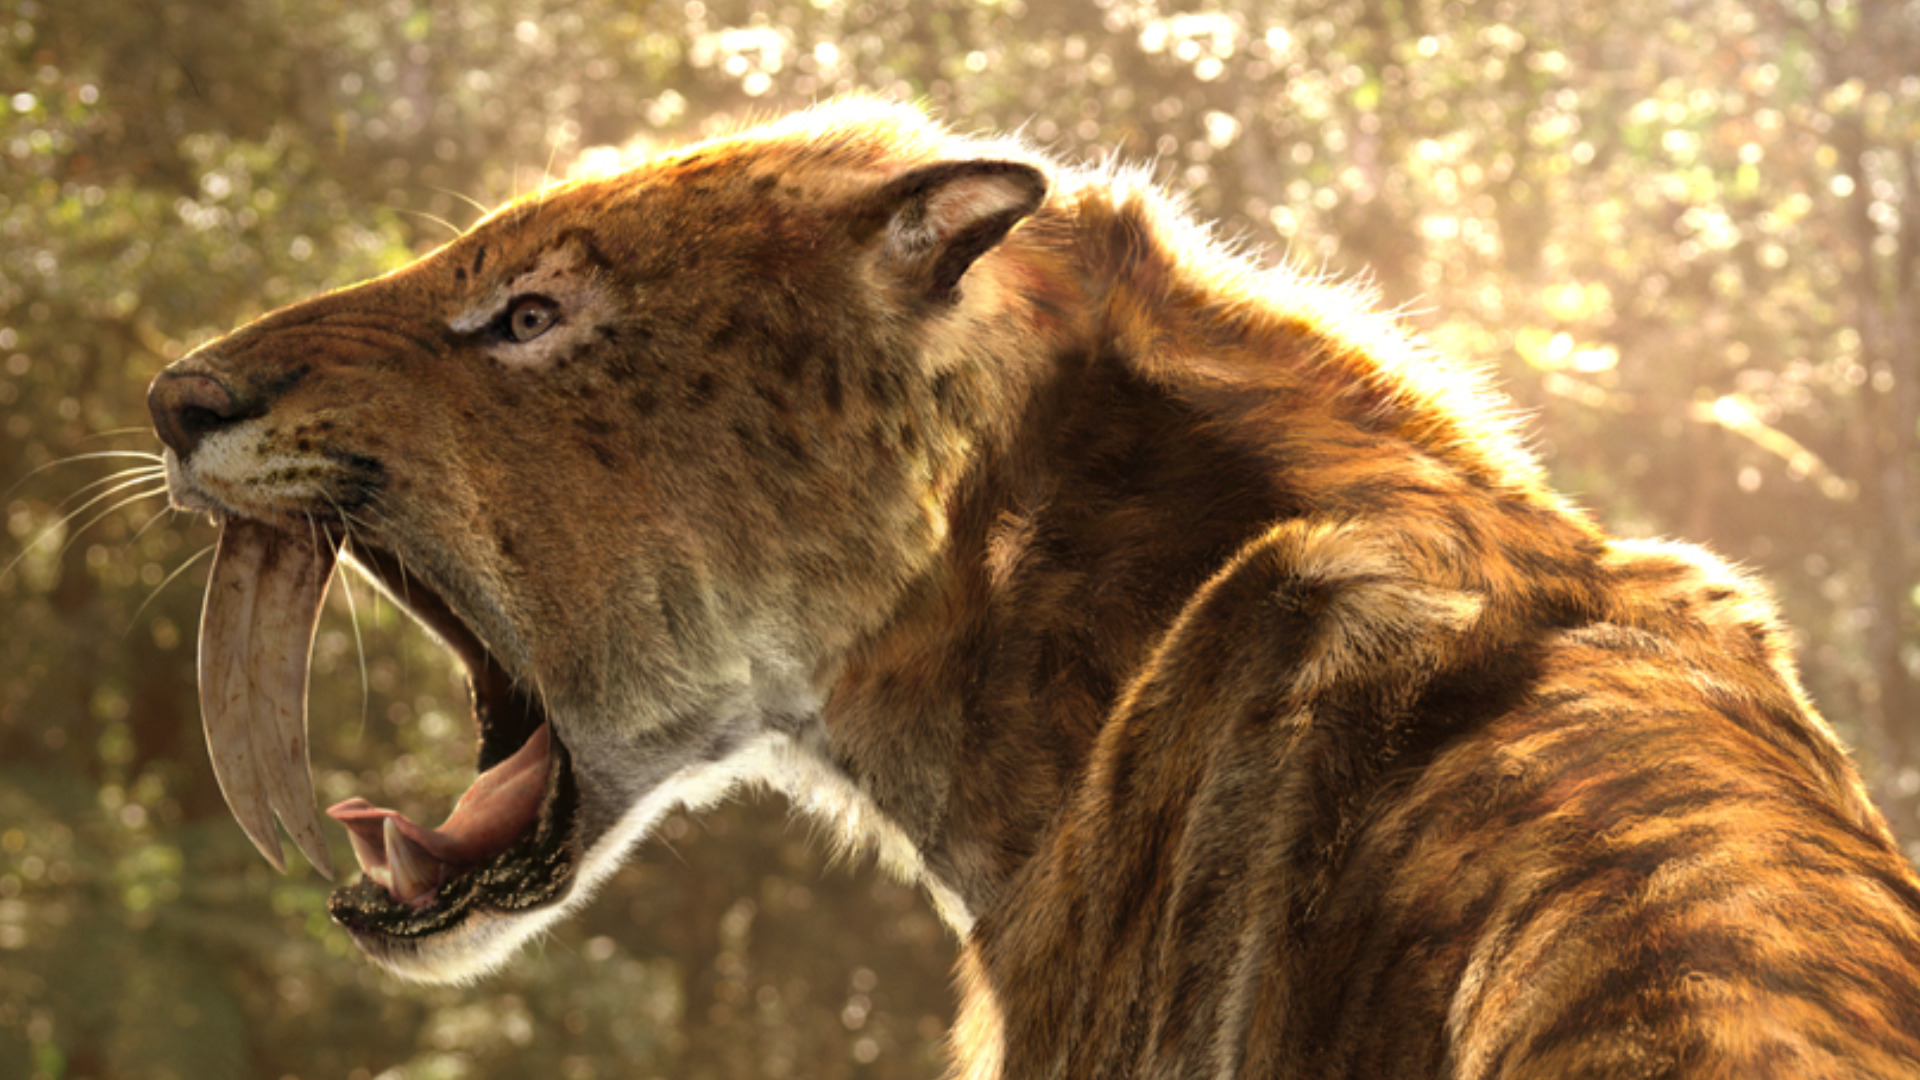 Saber-Toothed Tiger HD Wallpapers and Backgrounds. 